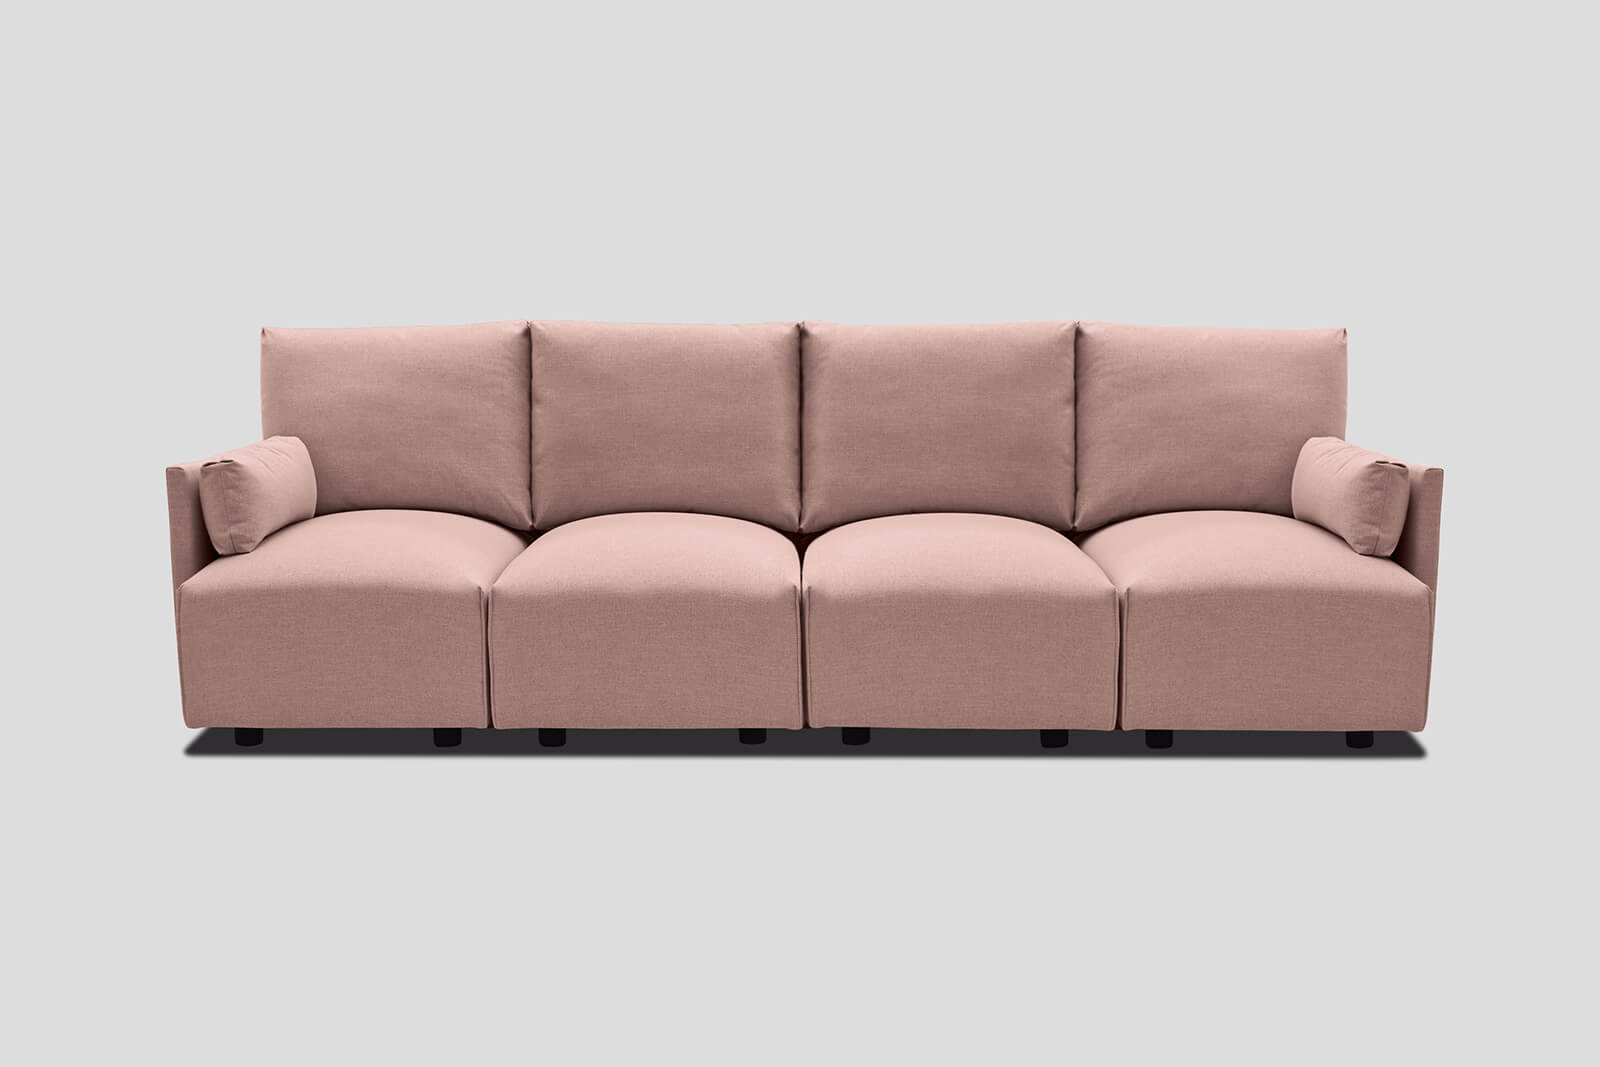 HB04-large-sofa-rosewater-front